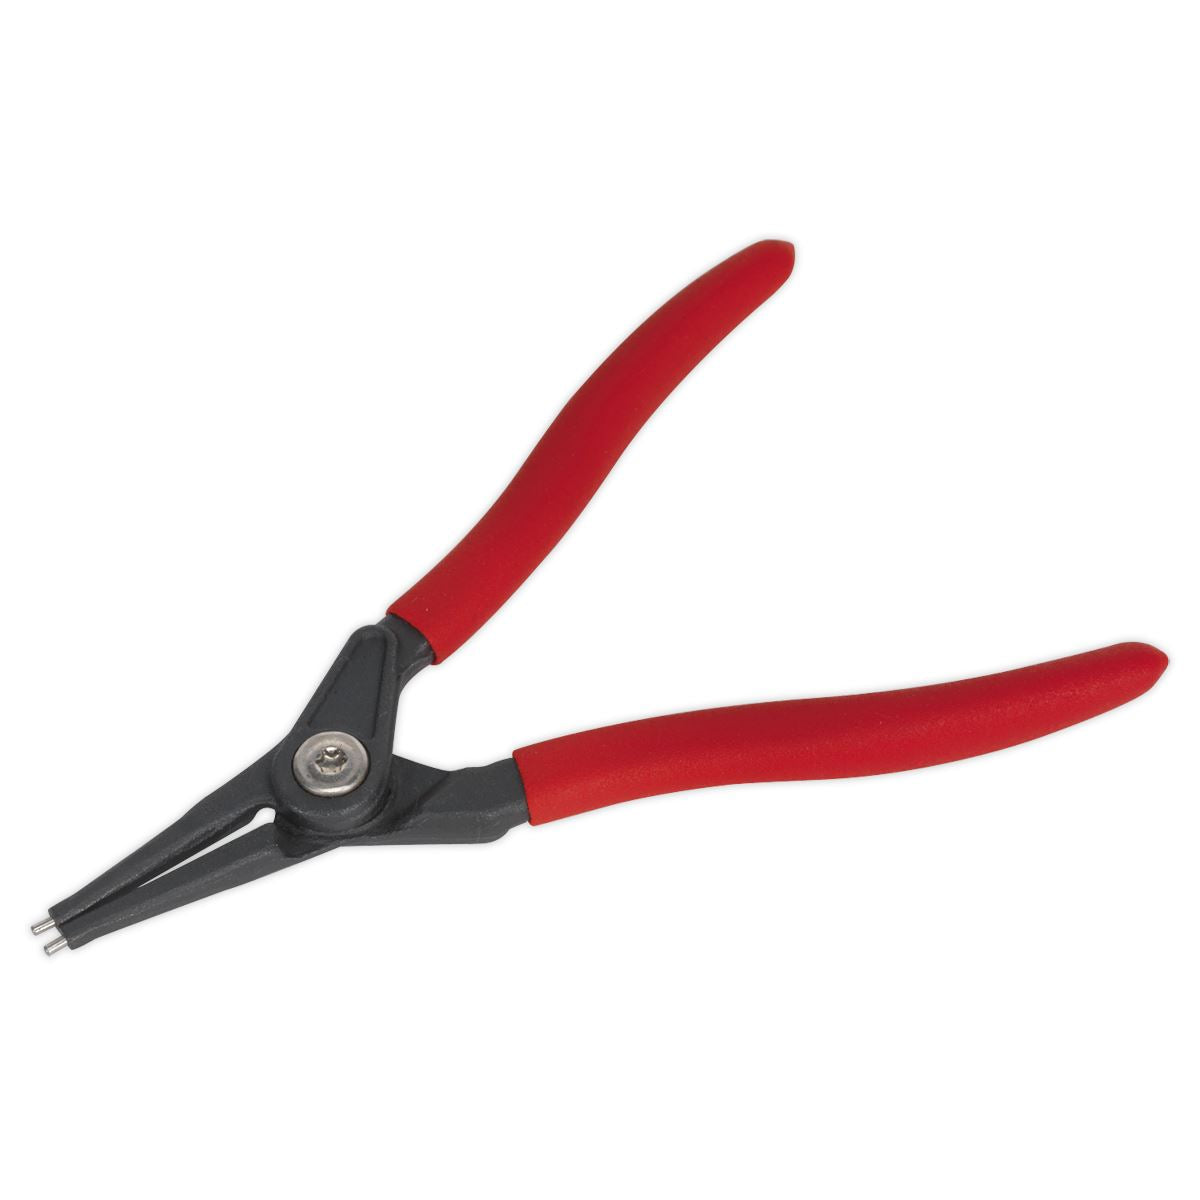 Sealey Premier Circlip Pliers External Straight Nose 170mm